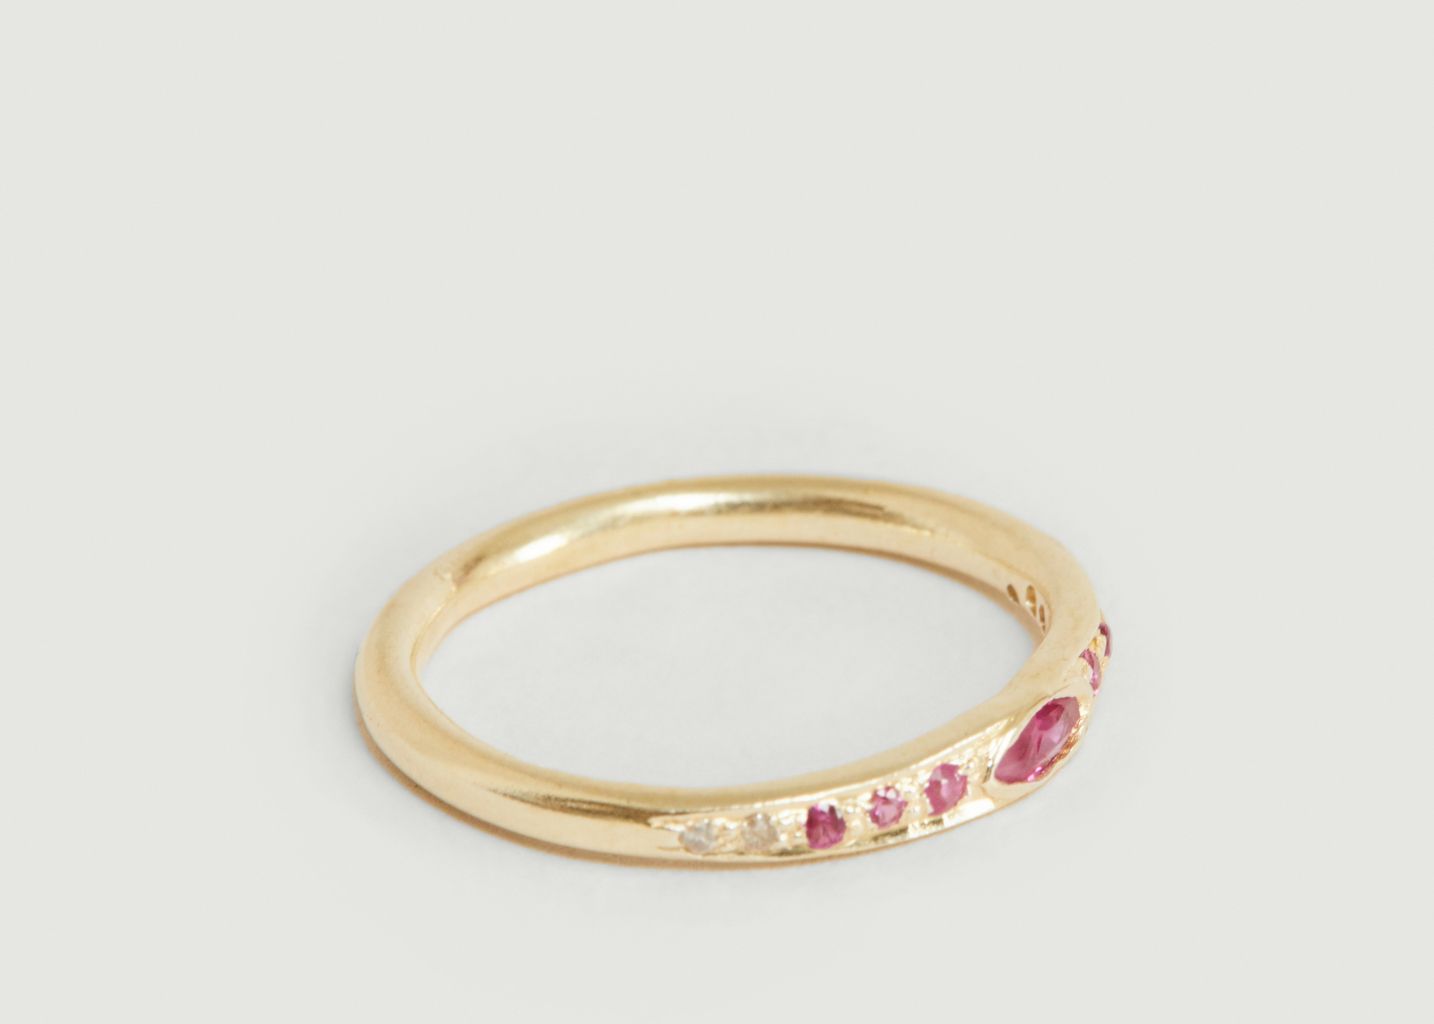 Gitane ring with colored stones - 5 Octobre